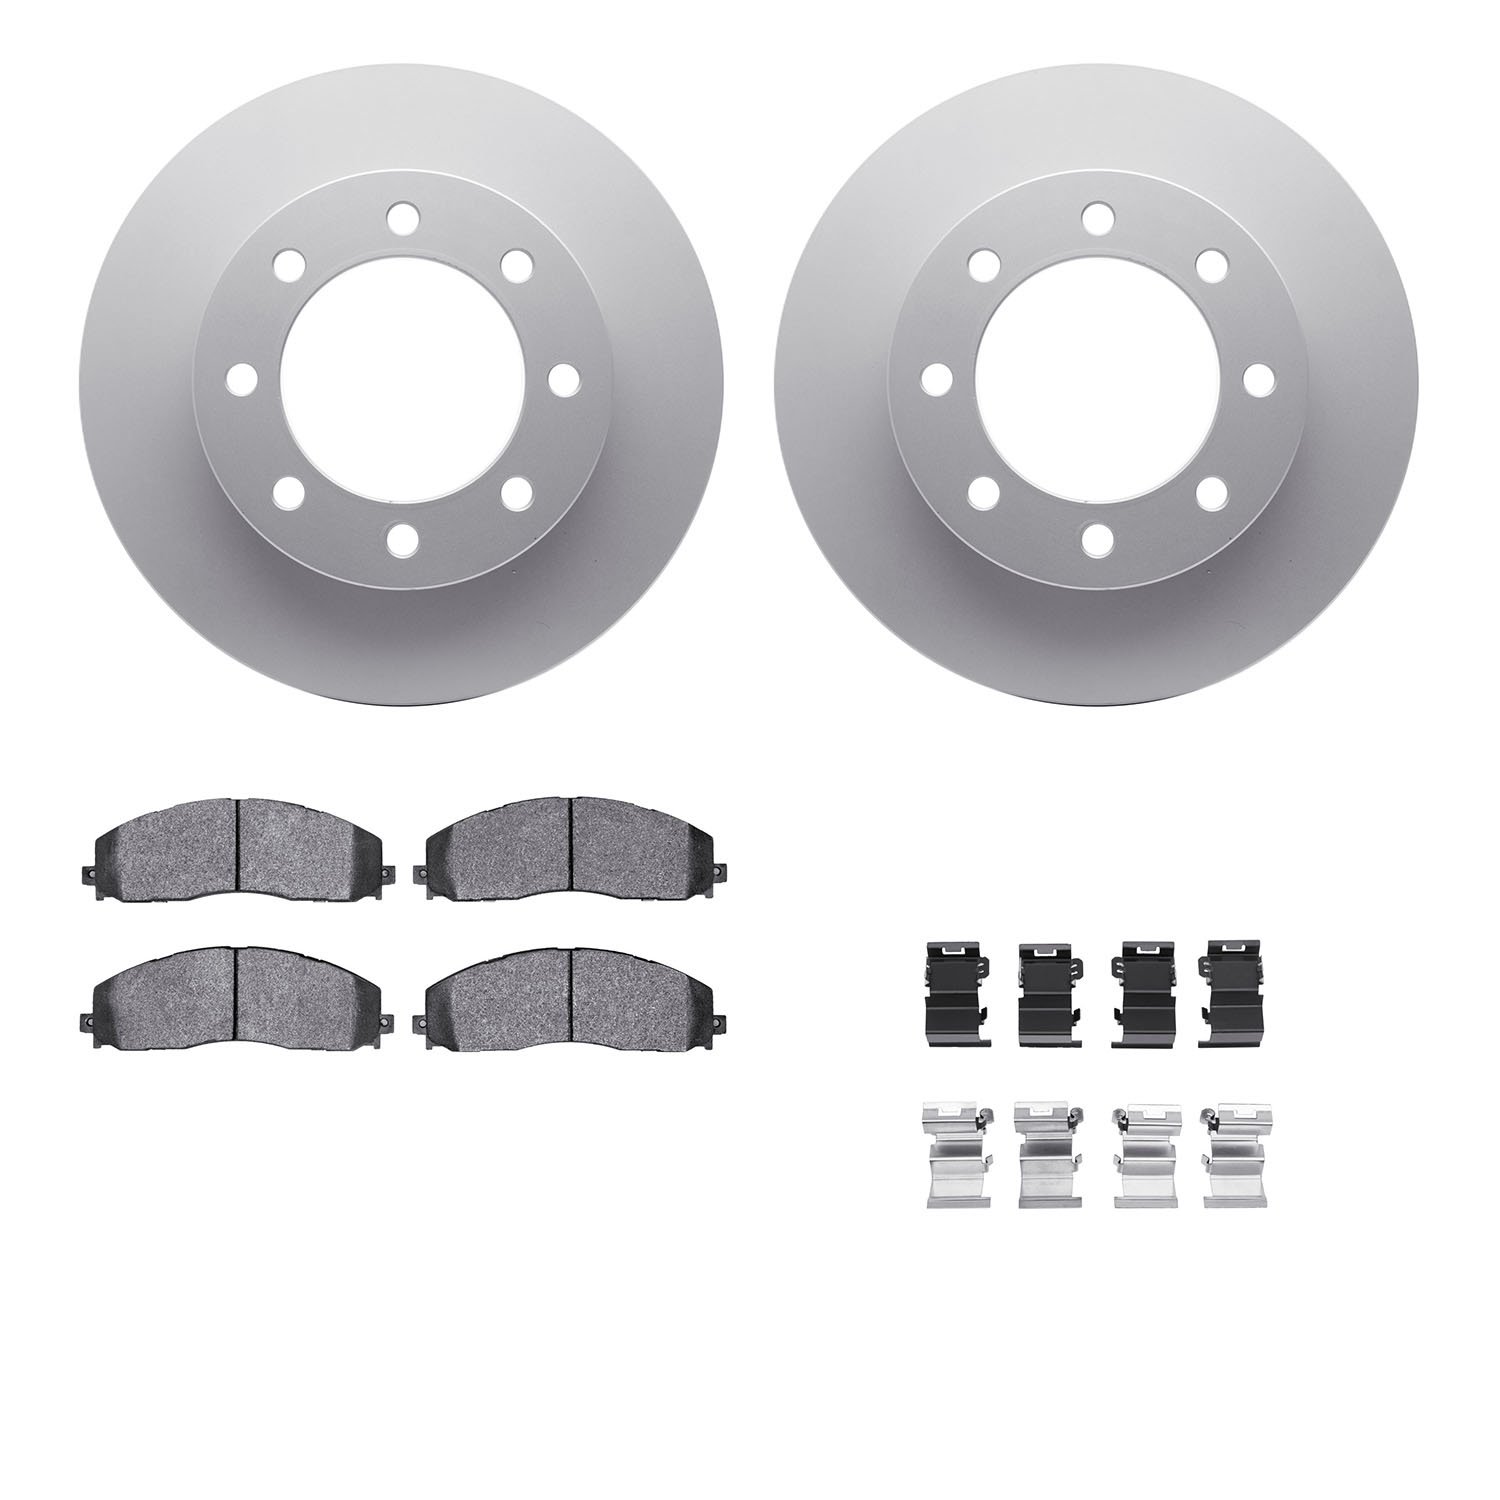 4412-54071 Geospec Brake Rotors with Ultimate-Duty Brake Pads & Hardware, Fits Select Ford/Lincoln/Mercury/Mazda, Position: Fron